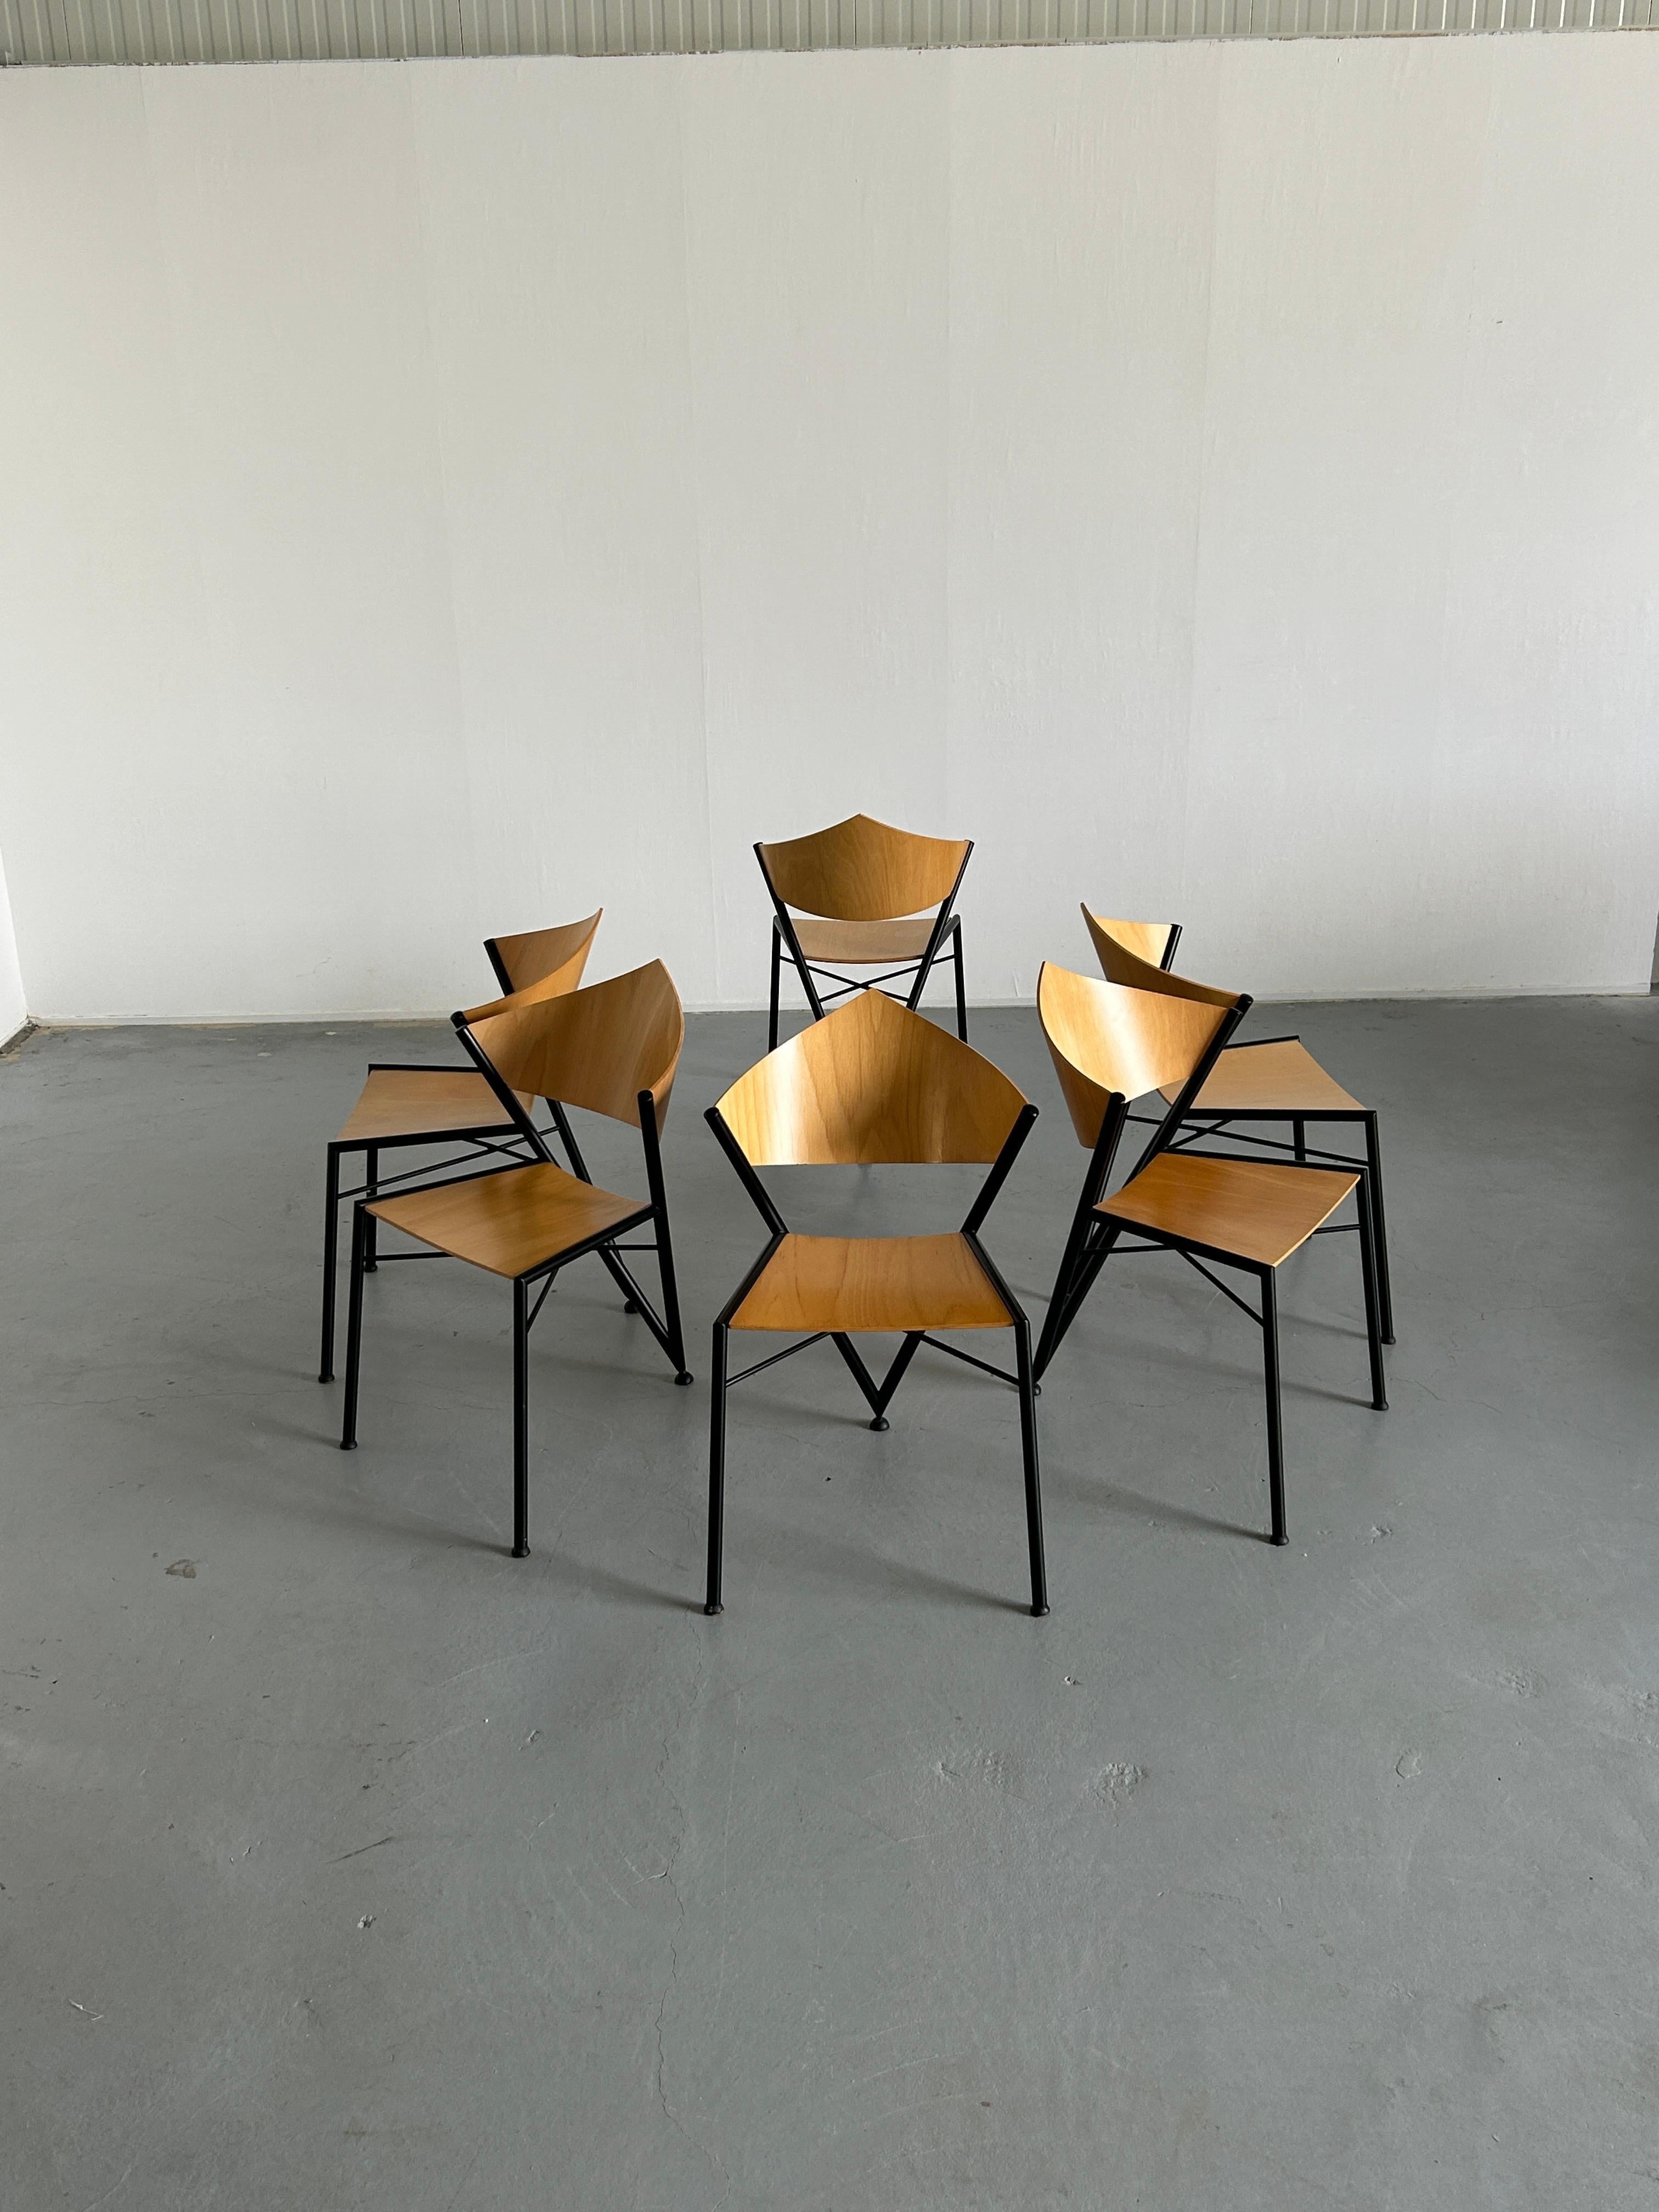 Six metal frame and plywood postmodern chairs designed and produced in the 1980s. Triangle shapes dominating the design and resulting in a three-legged structure.
The design of the chairs shows strong influences from the Milanese Memphis